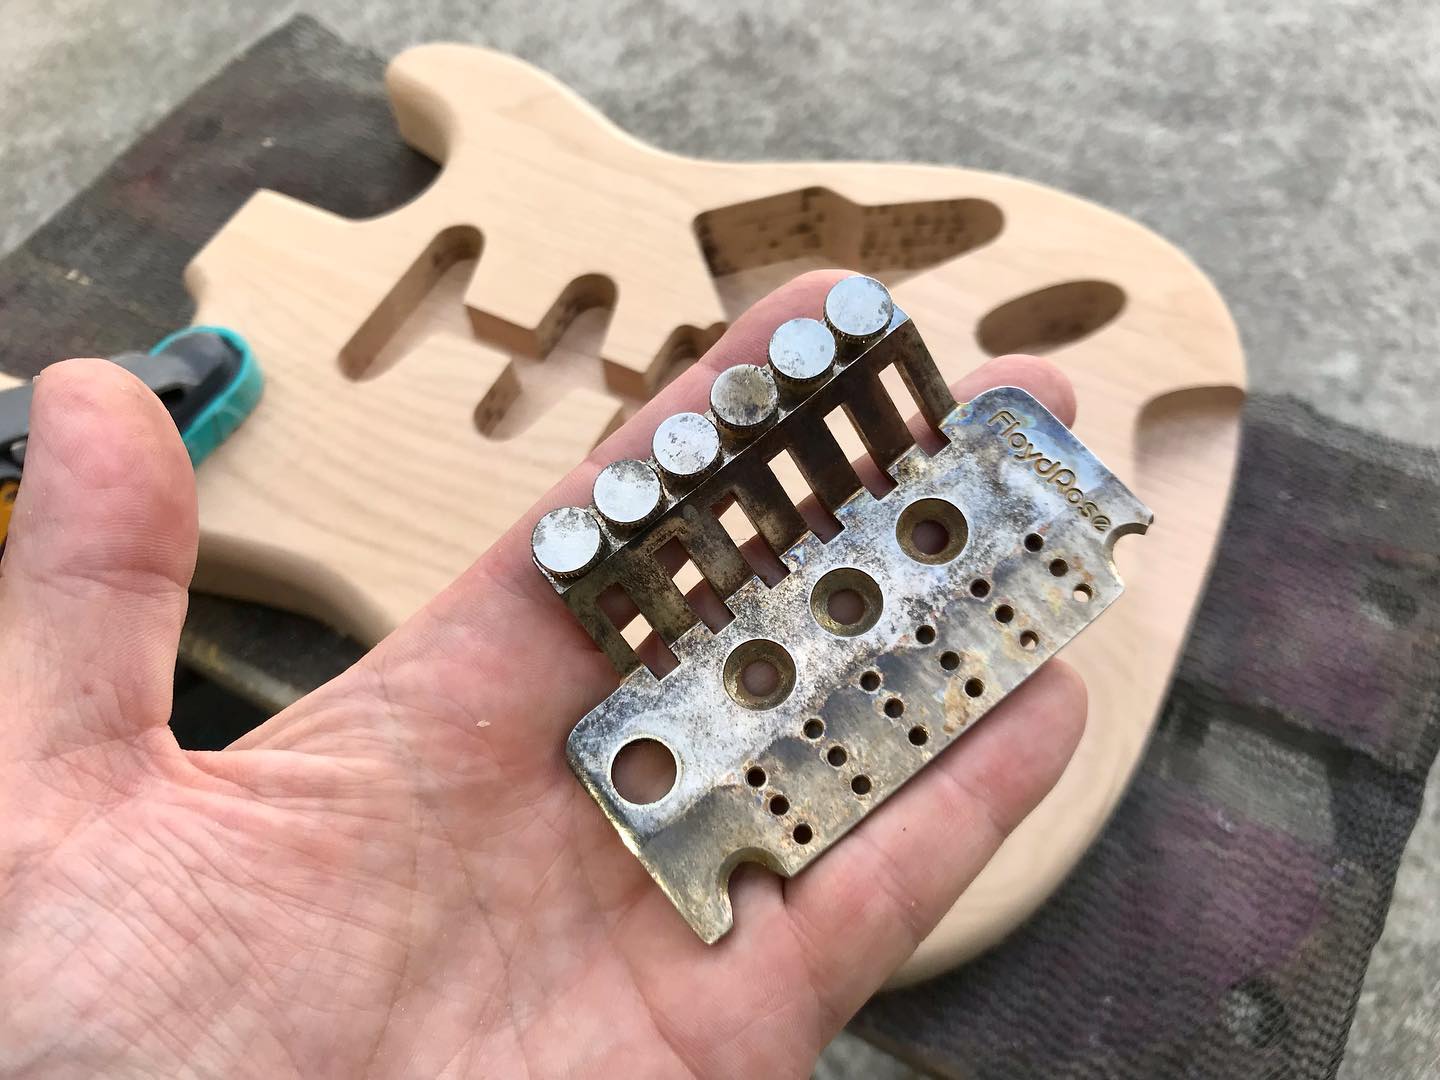 Playing with acid… 😈
#guitar #guitare #guitarmaker #guitarmaking #lutherie #superstrat #floydrose #relic #relicguitar